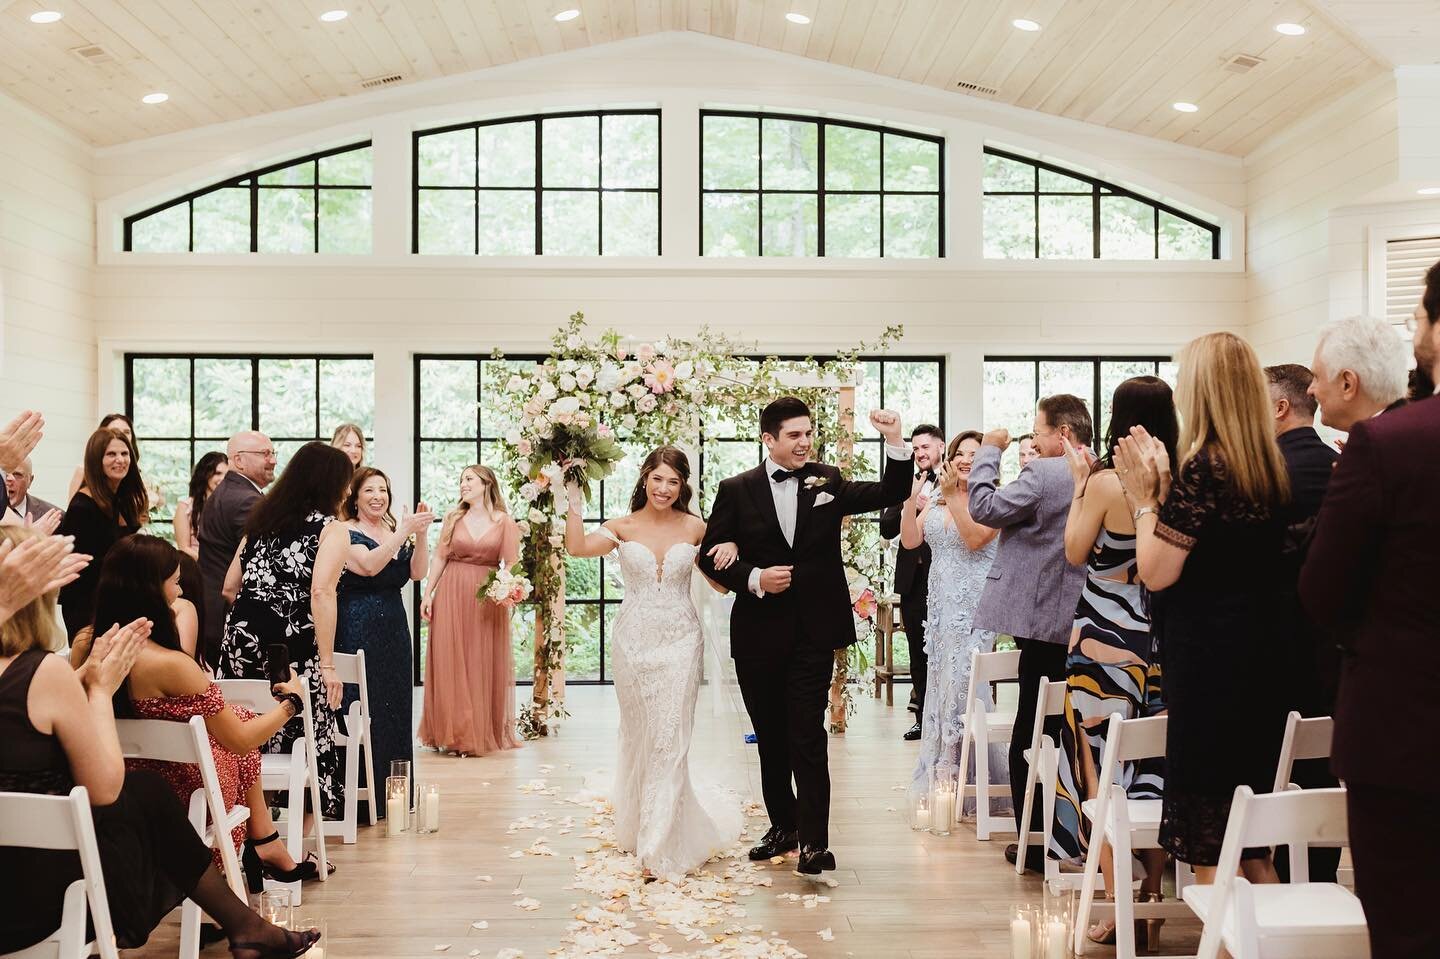 Holding hands with your person, walking into your next chapter together. Cheers, smiles, and tears as pass by your loved ones. It&rsquo;s a favorite moment that I get to witness, and that I&rsquo;ve experienced in my life. 

✨ wonderful team:
@oldedw